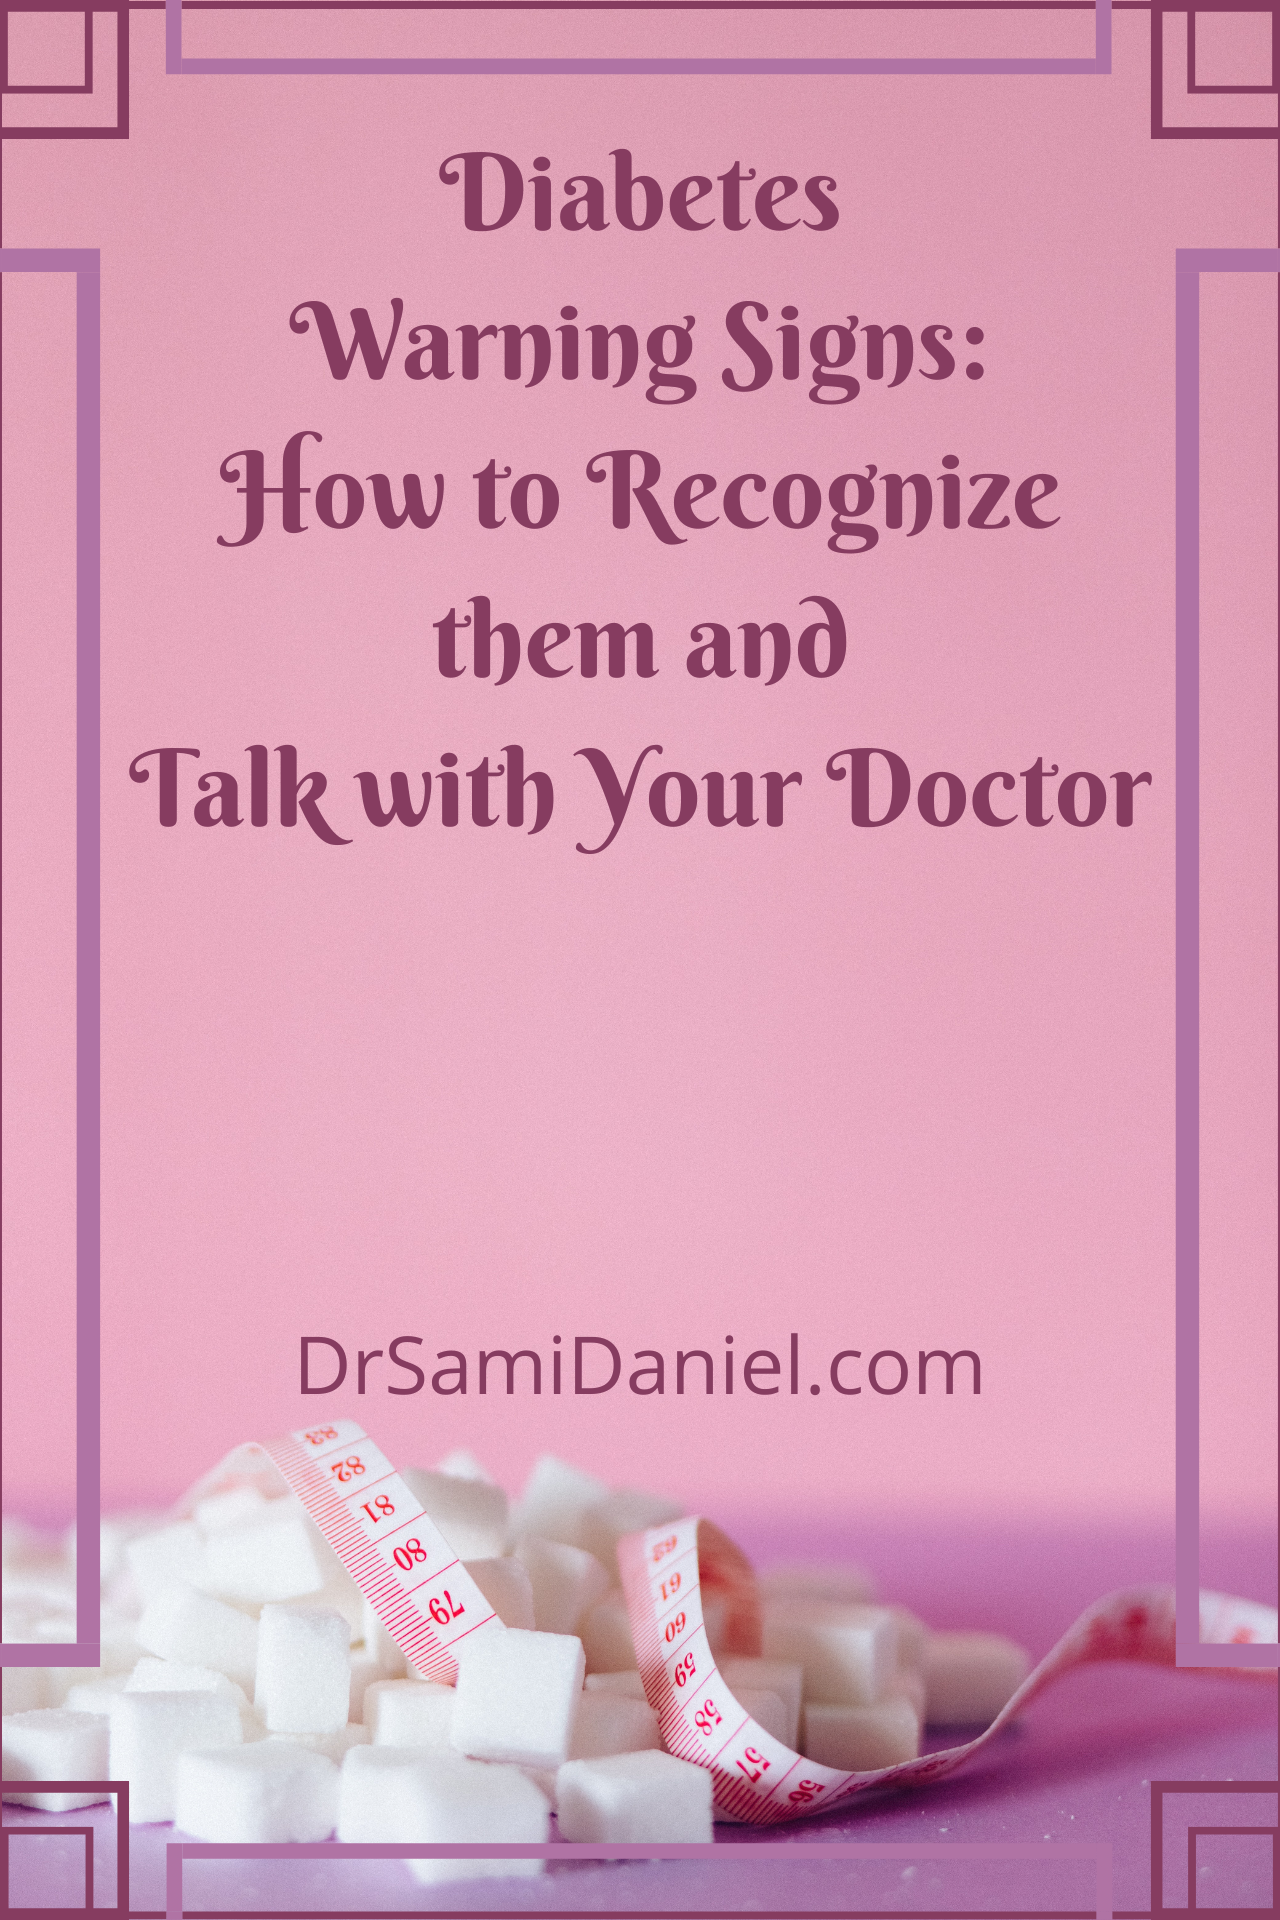 How to recognize the warning signs of diabetes